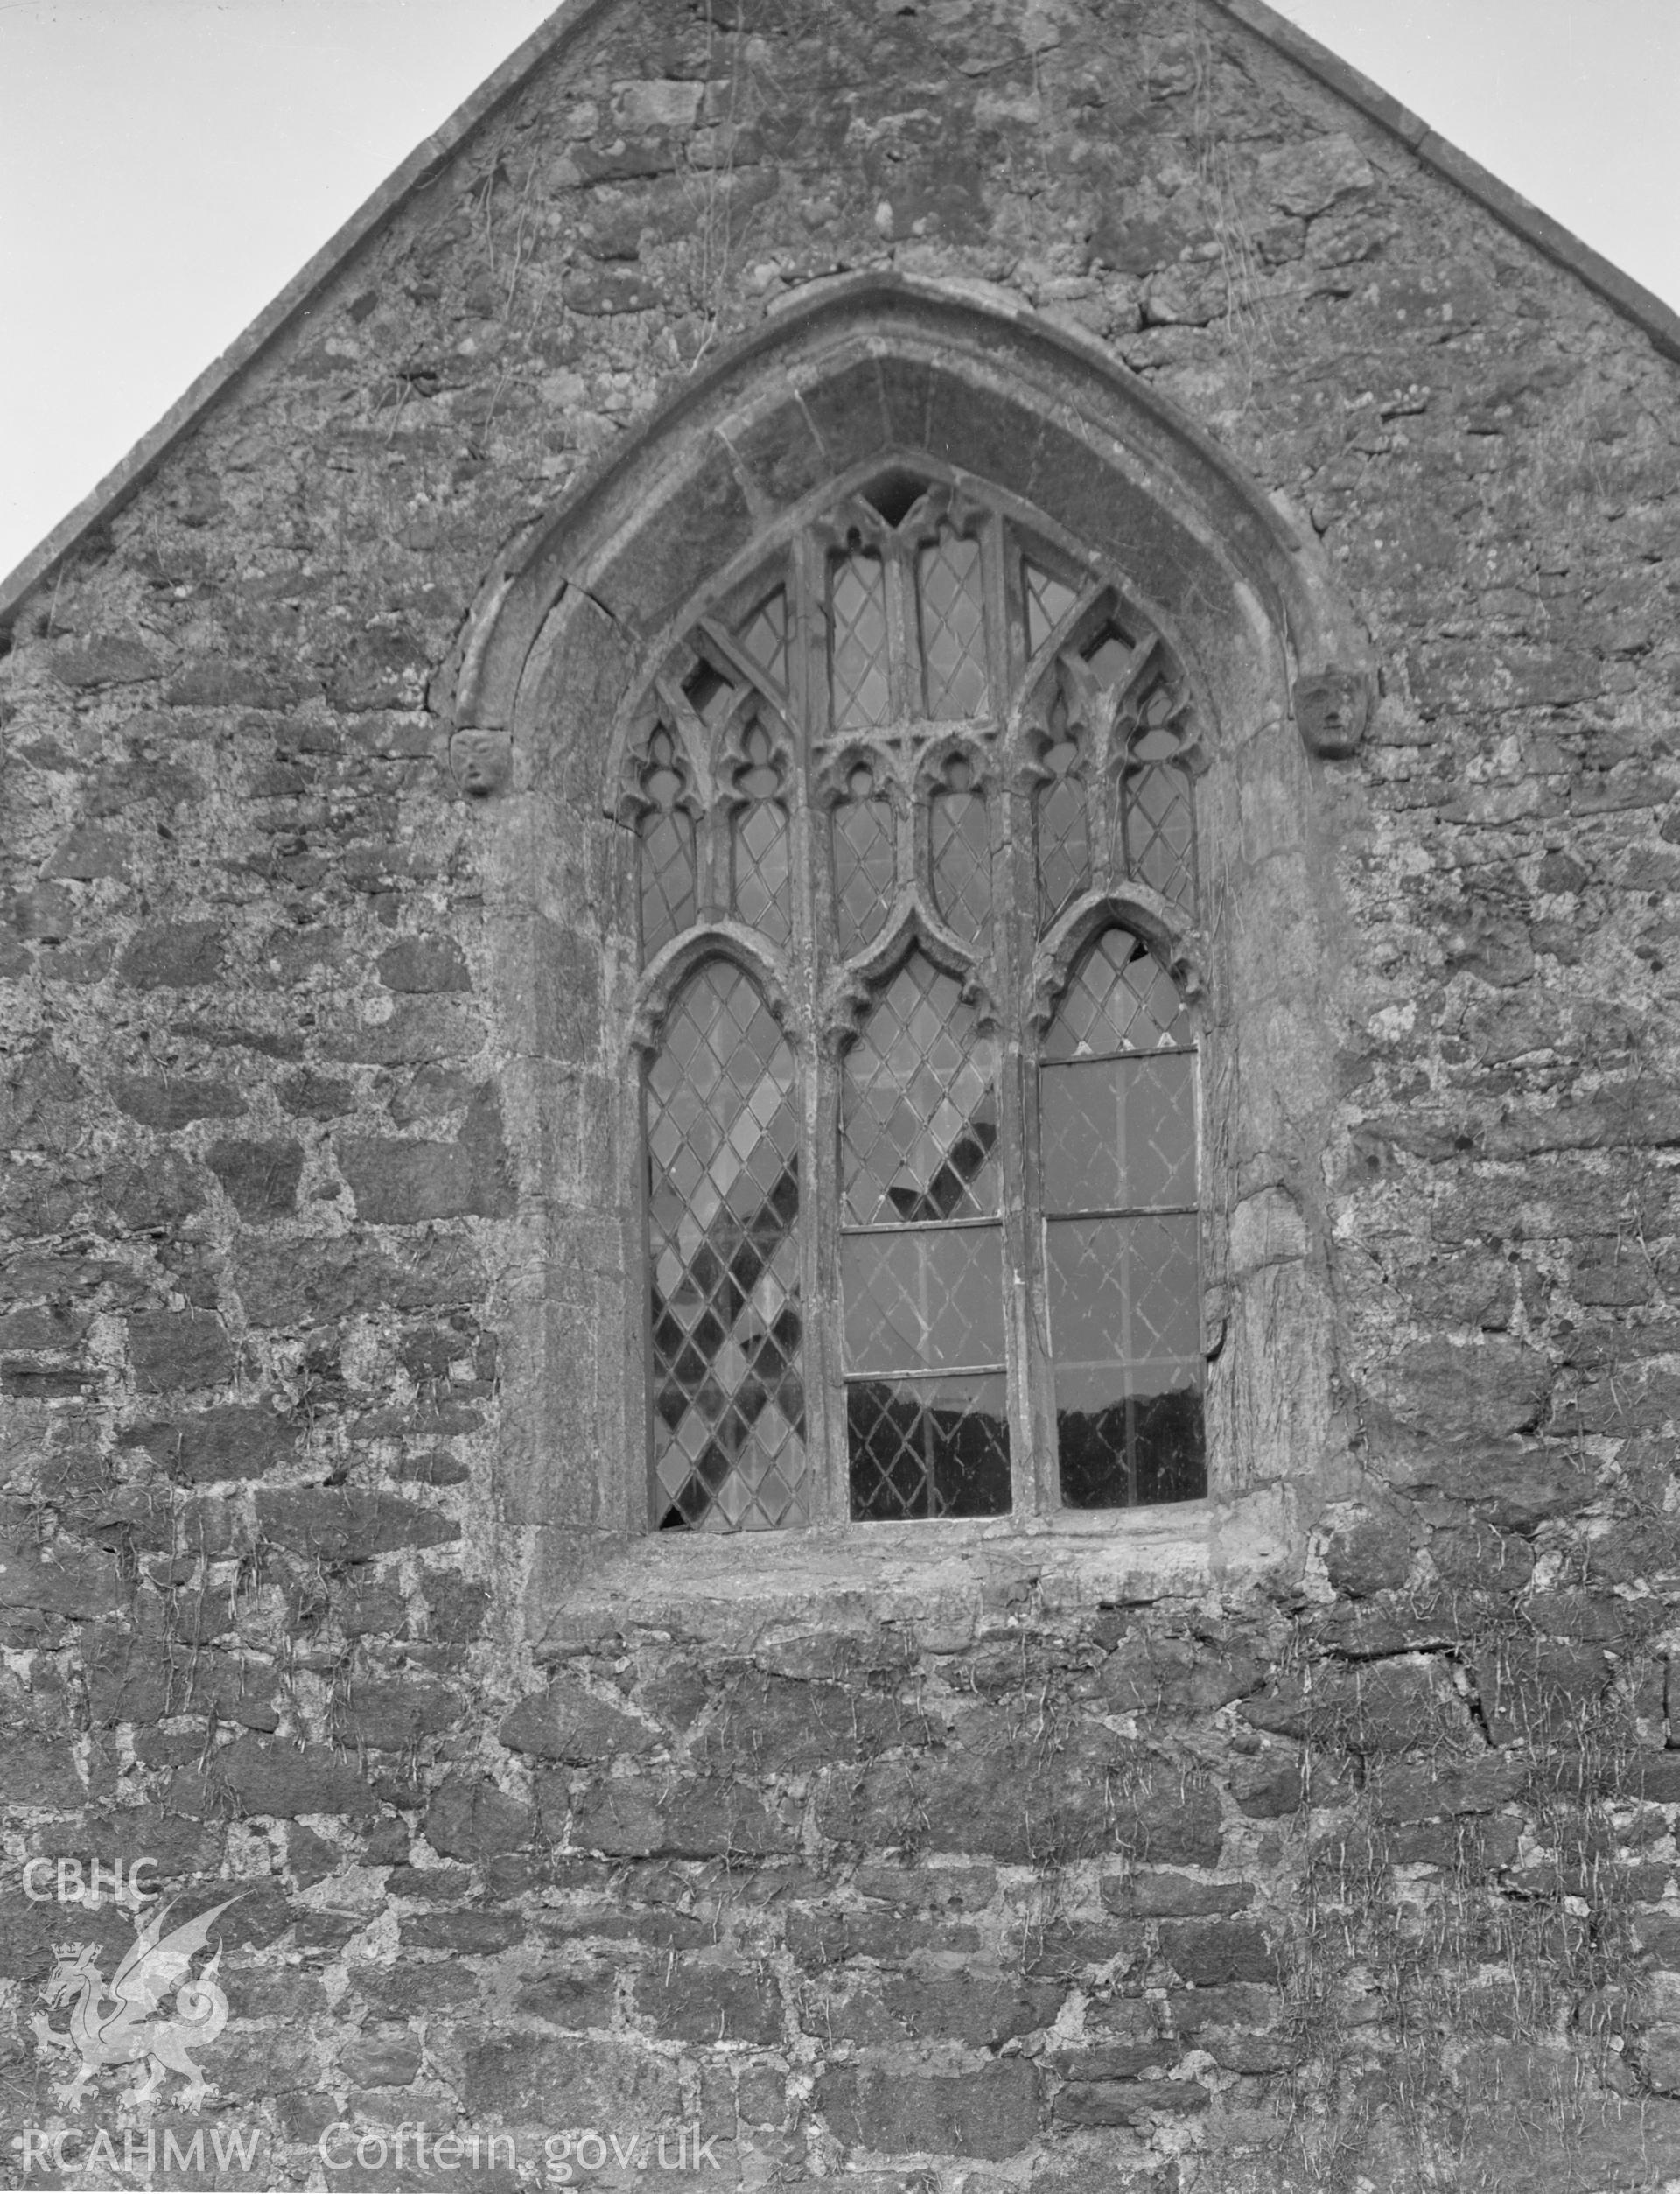 Black and white nitrate negative showing exterior view of Llangwnadl Church.